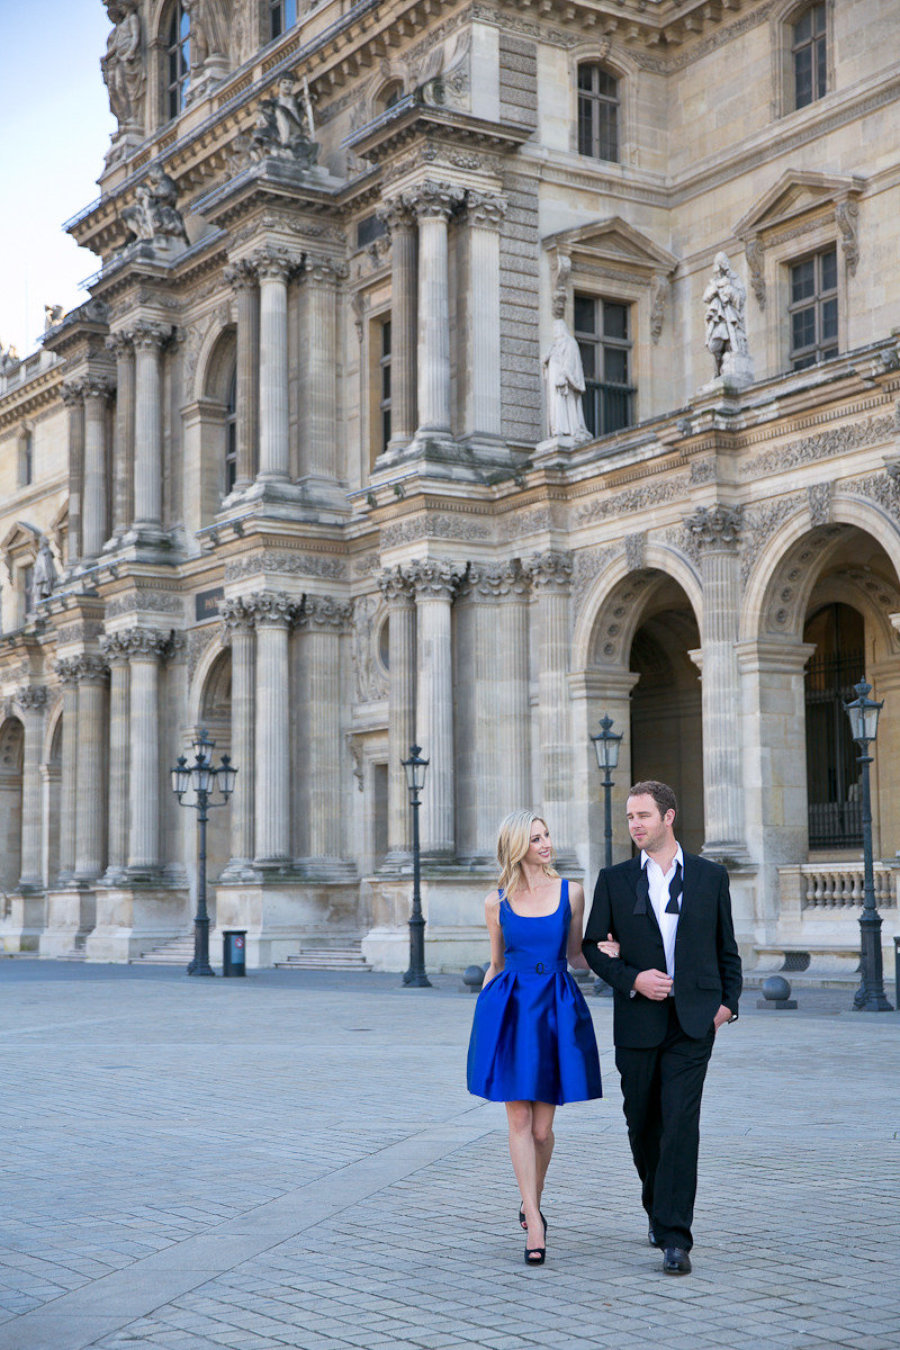 Parisian Engagement Session. One and Only Paris Photography // Don't know what to wear for your engagement pictures? Check out these 10 Formal Engagement Photo Outfit Ideas. // http://mysweetengagement.com